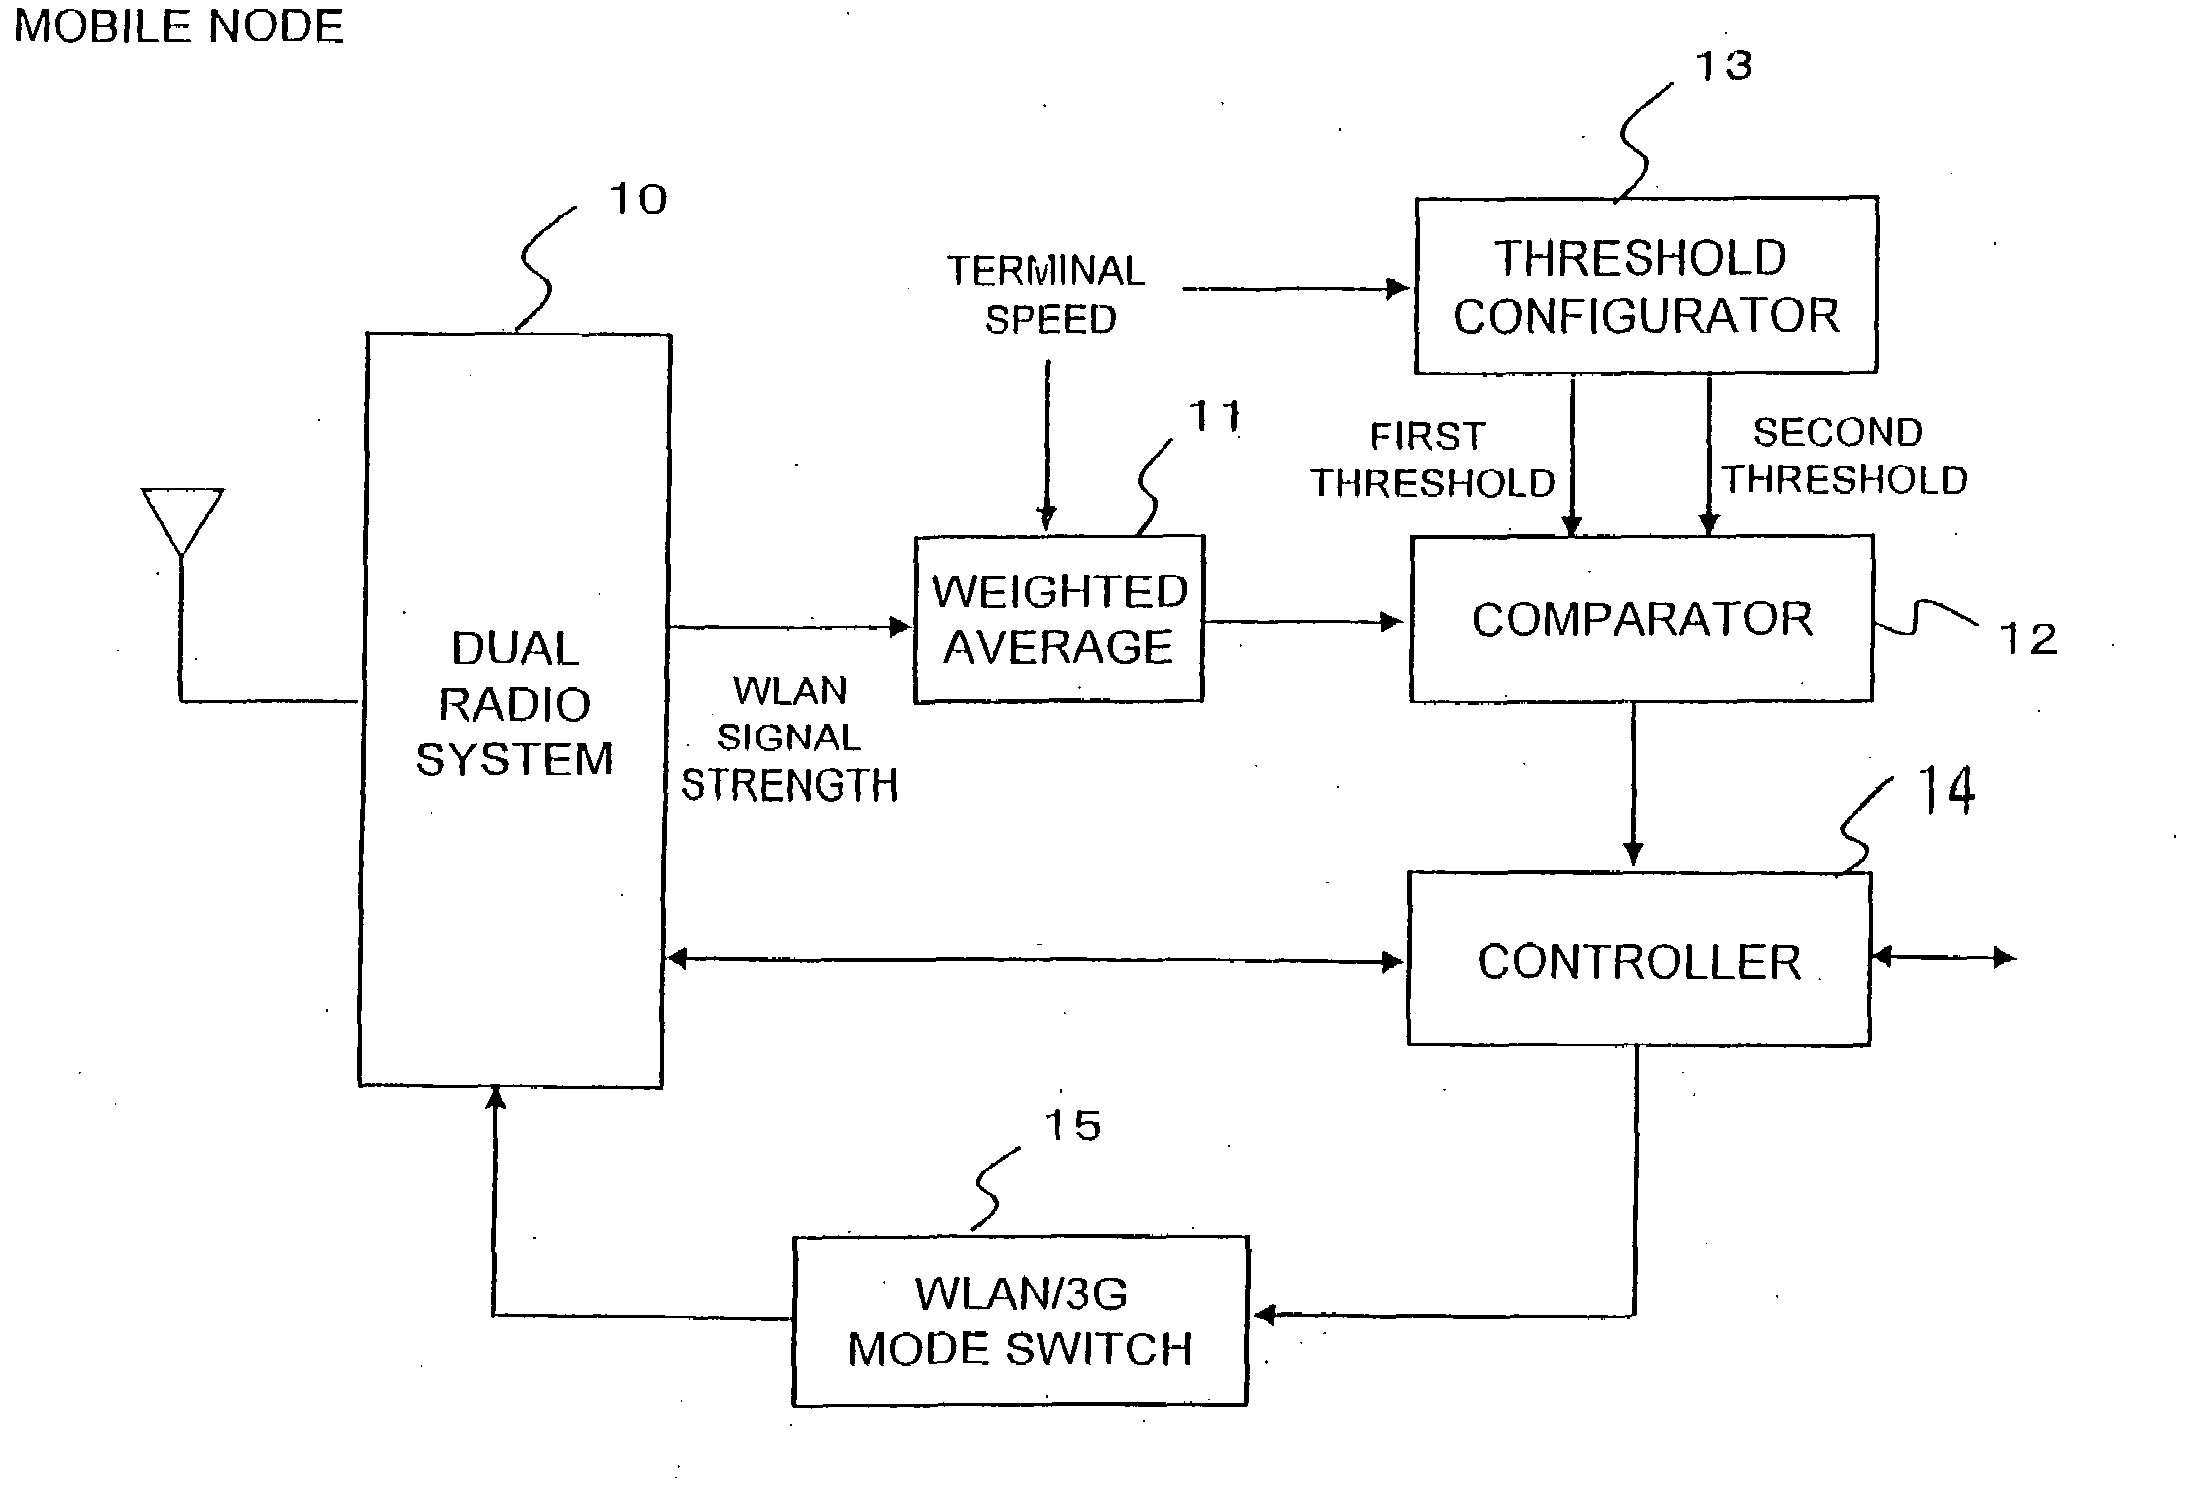 Method for controlling a mobile node